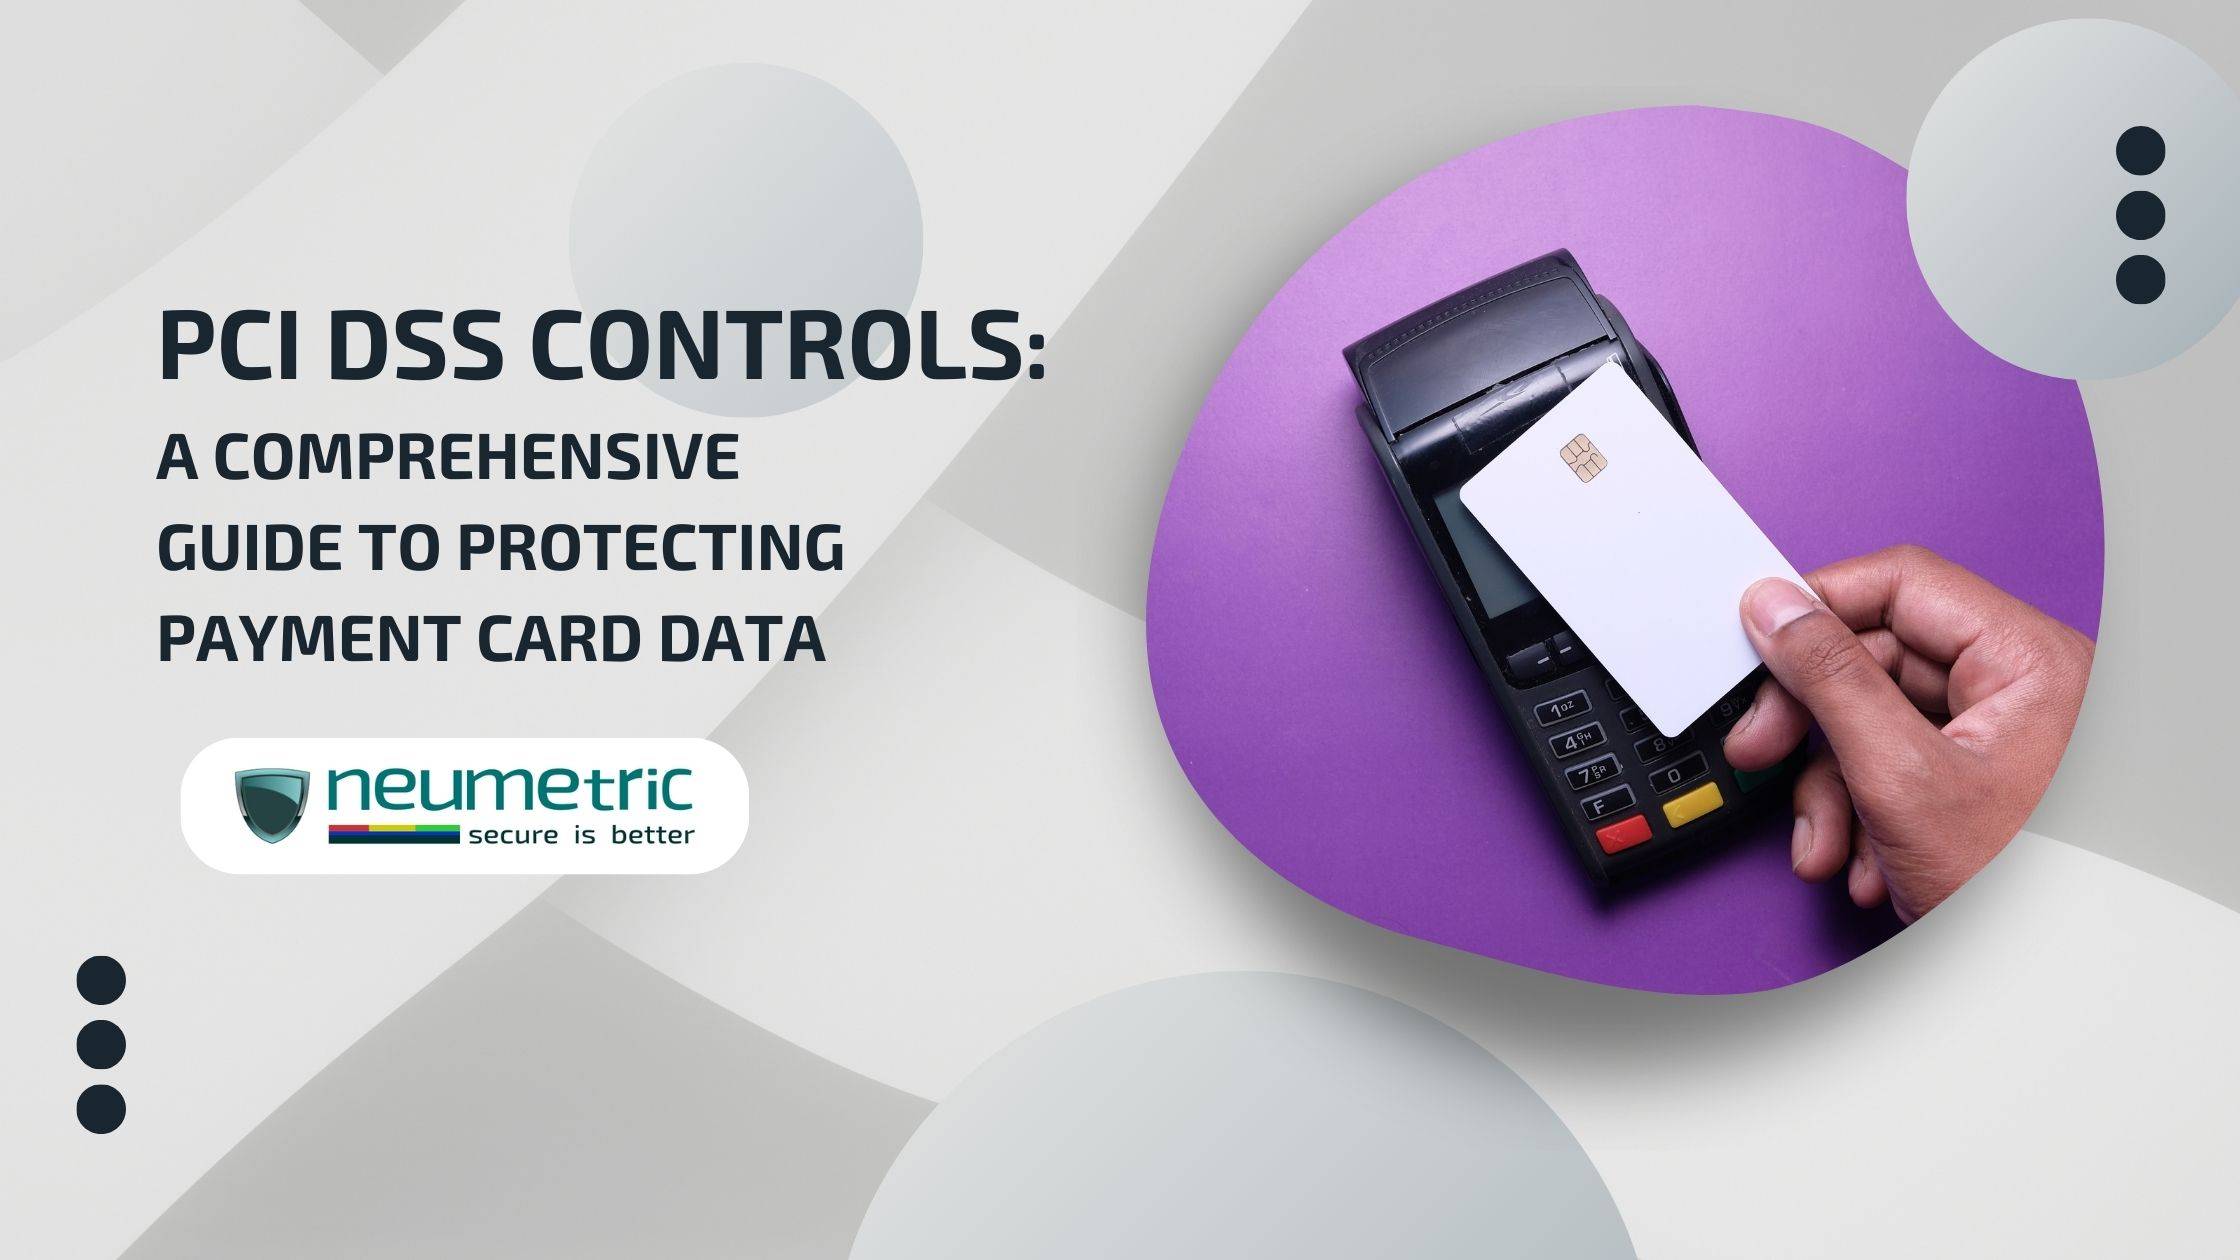 PCI DSS Controls: A Comprehensive Guide to Protecting Payment Card Data